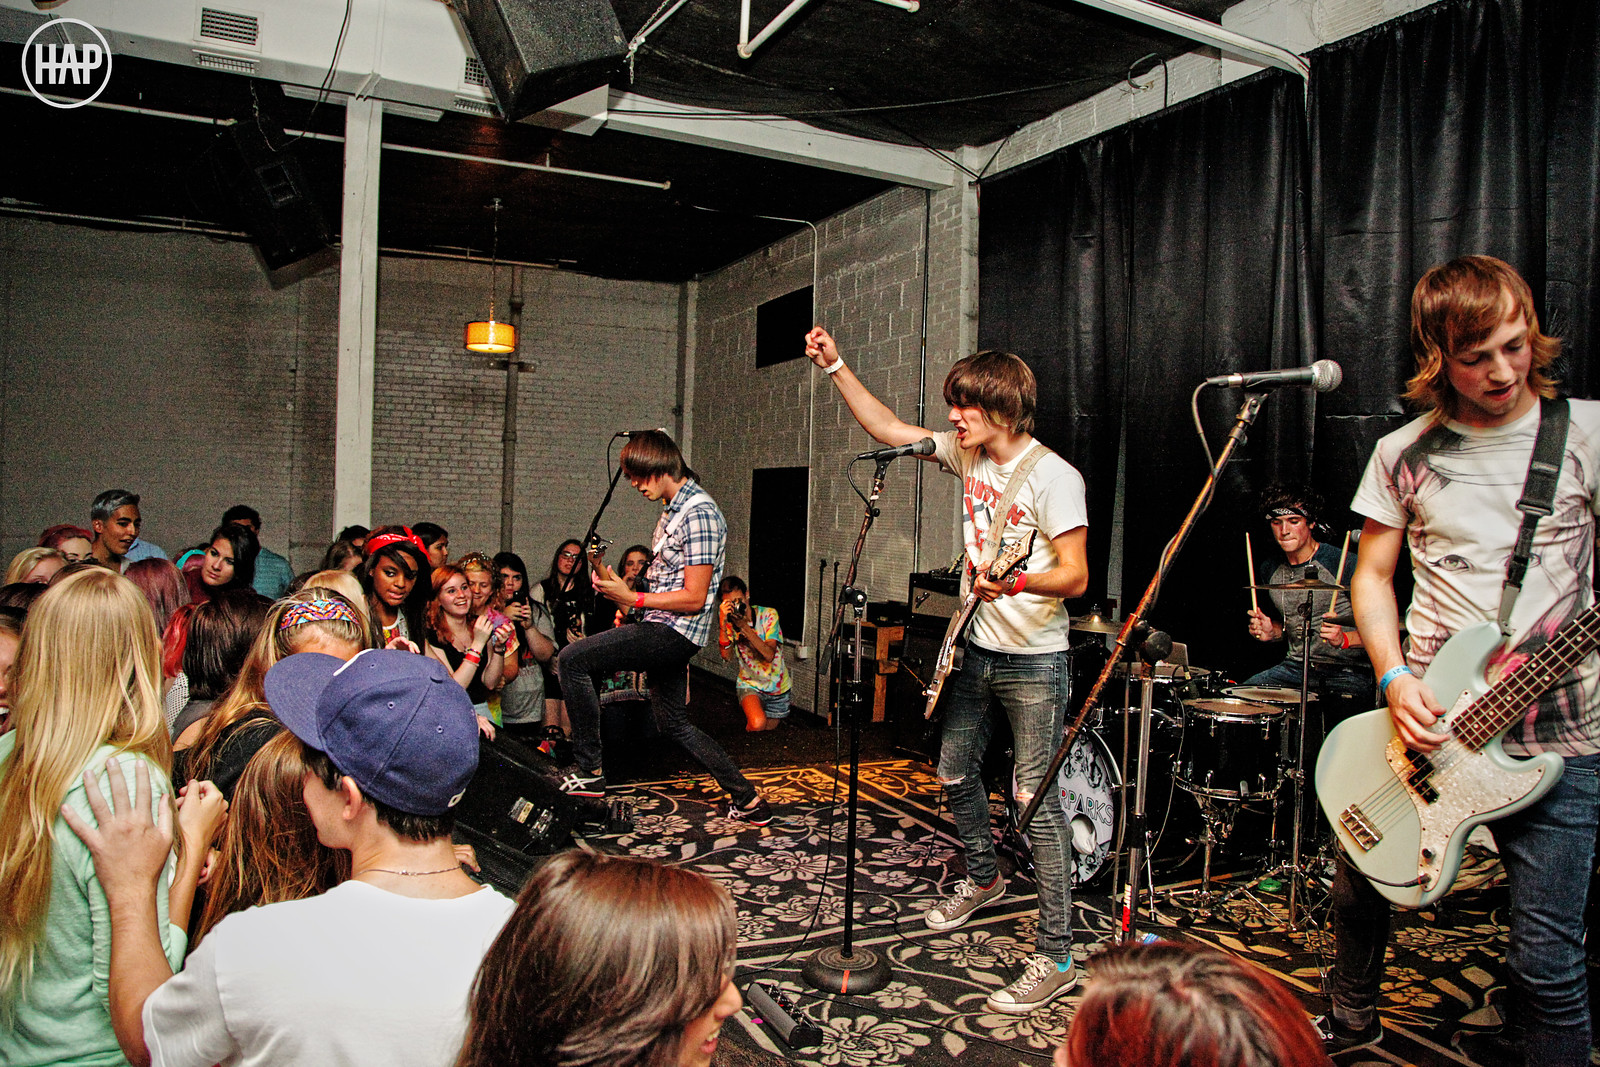 8-8-2013 at Walter's in Houston, Texas by Heather Ann Phillips on Flickr